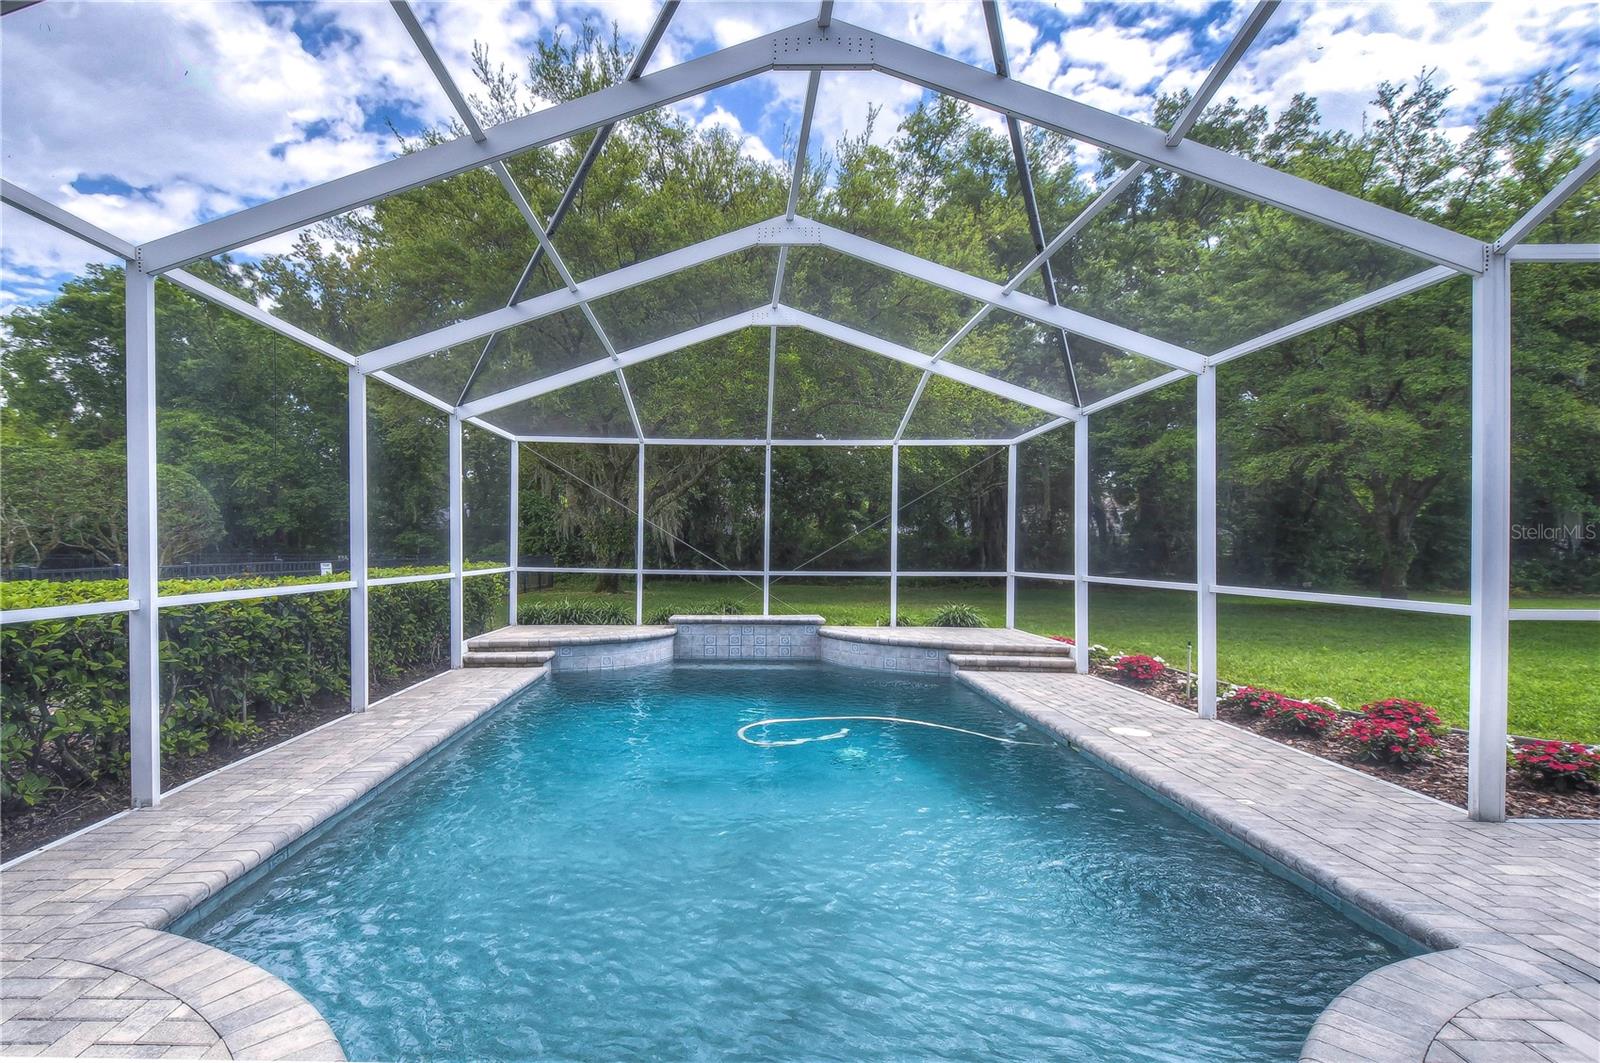 You and your family will spend countless hours enjoying your sparkling Pebble Tec pool!